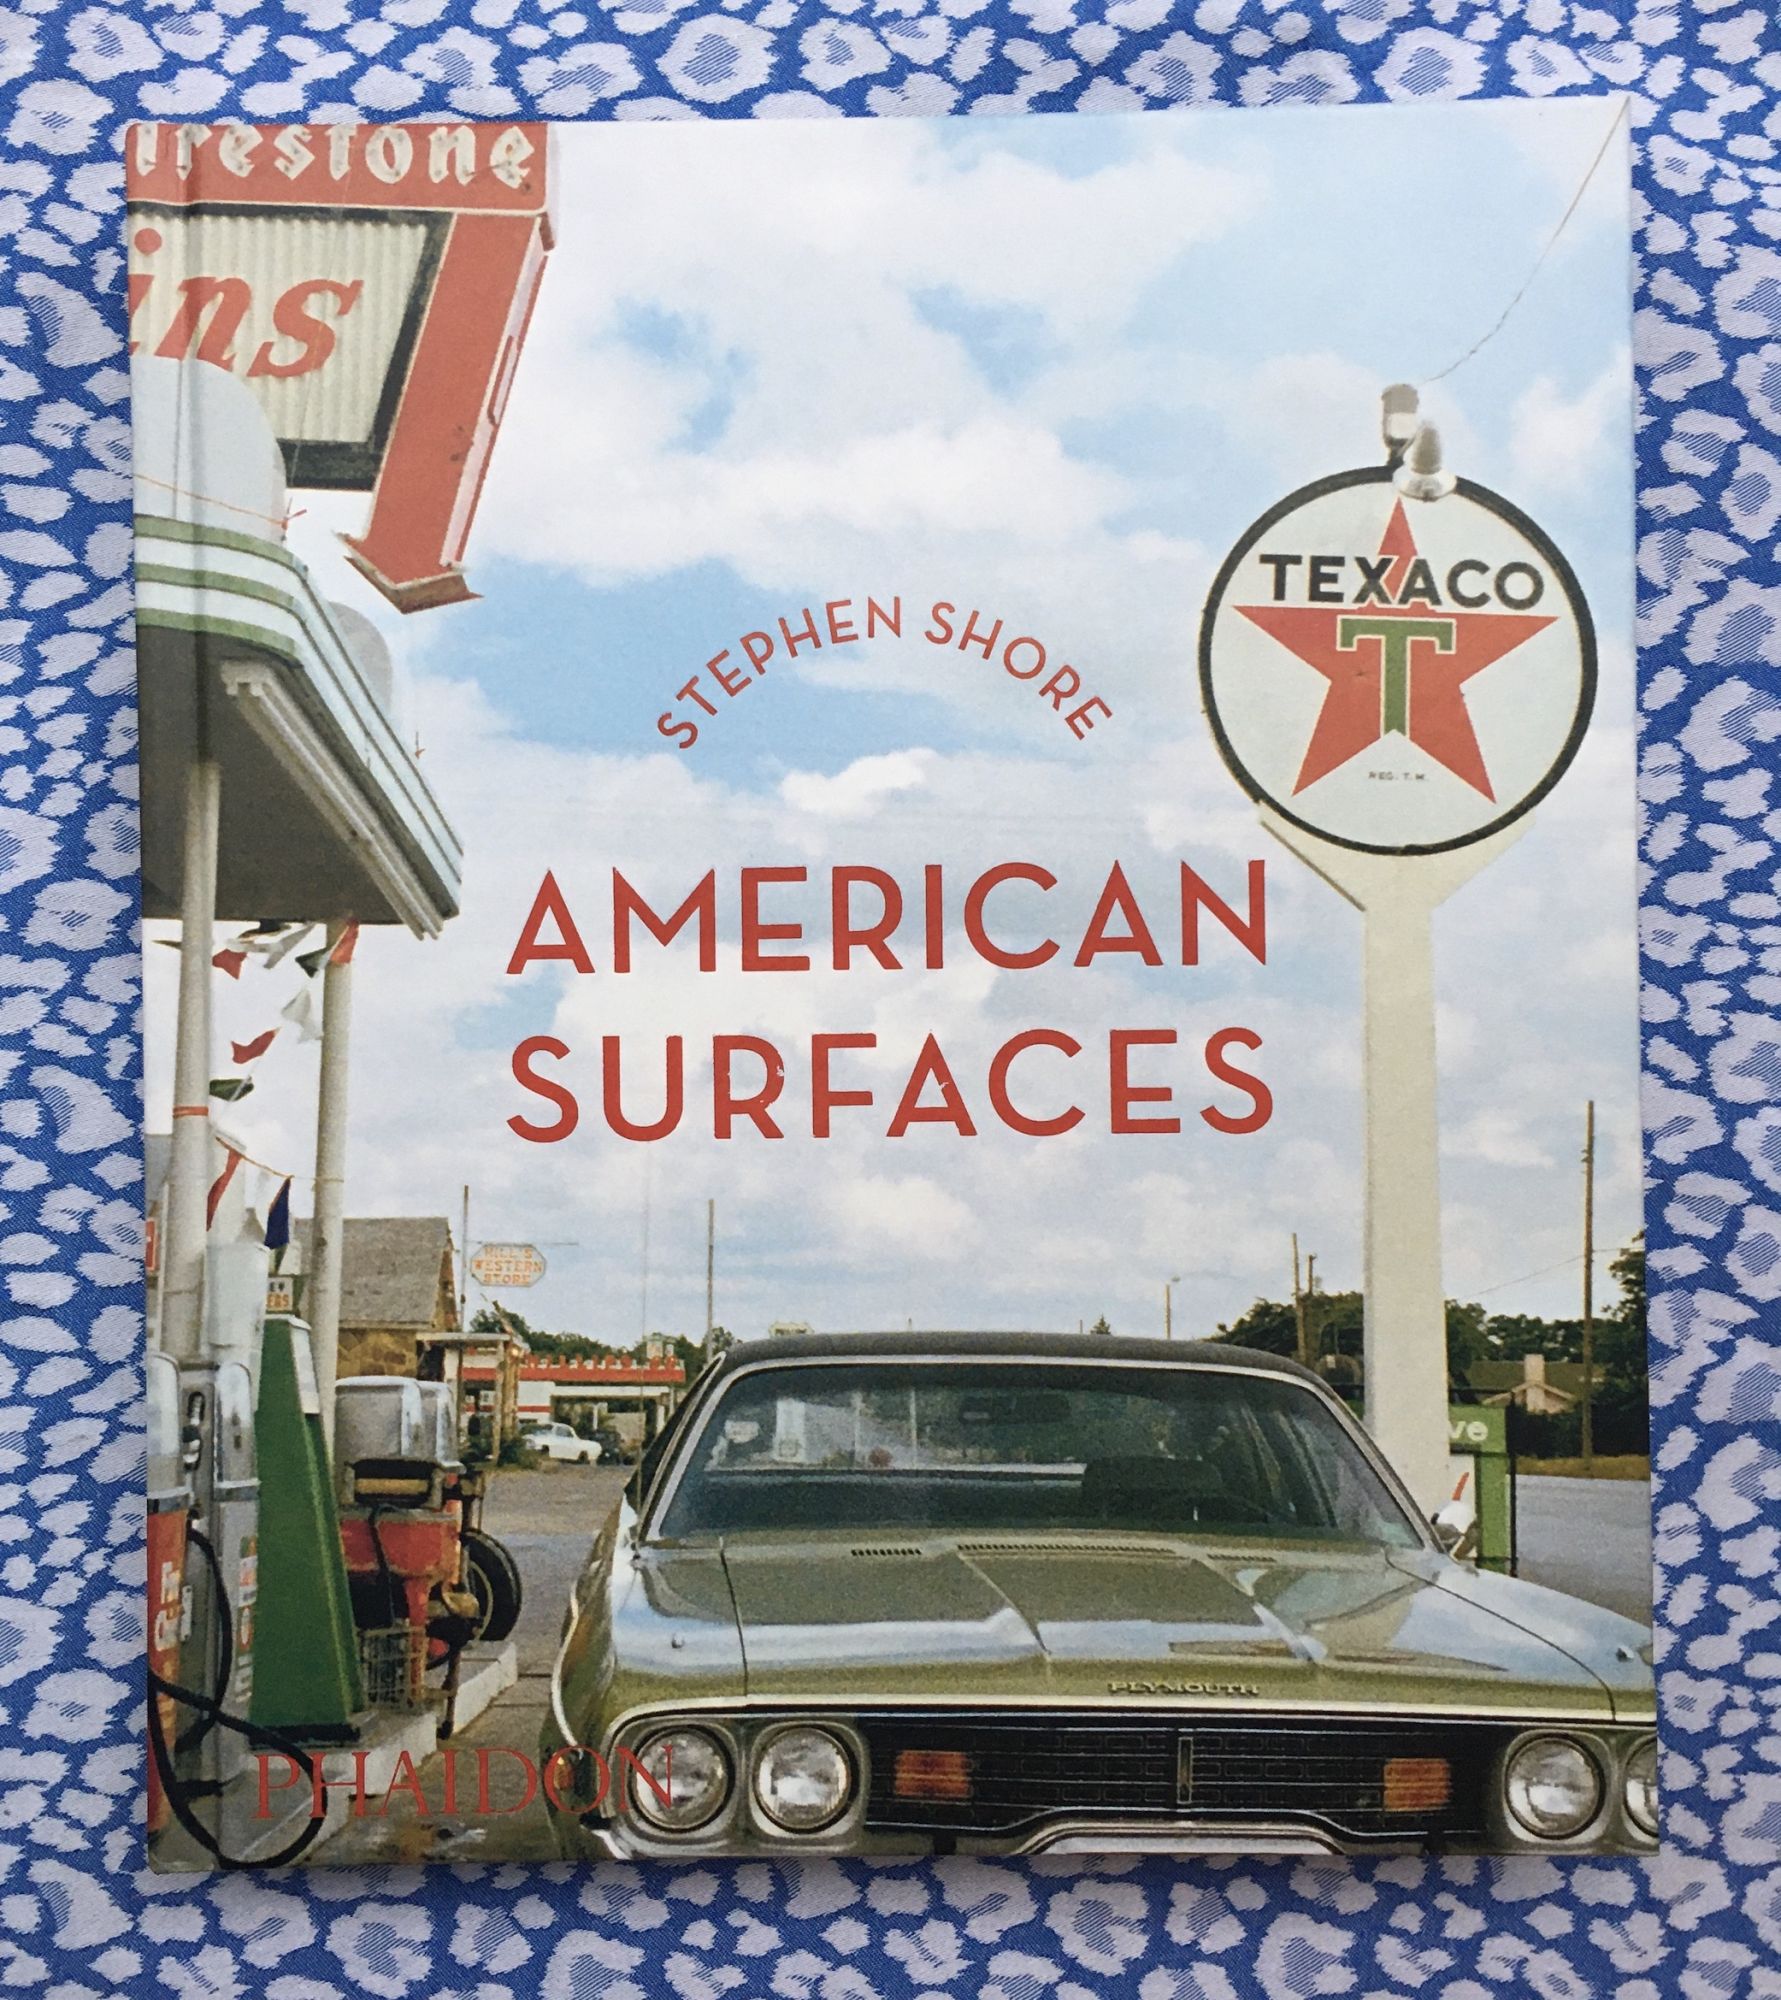 American Surfaces: Revised & Expanded Edition by Stephen Shore on Dashwood  Books